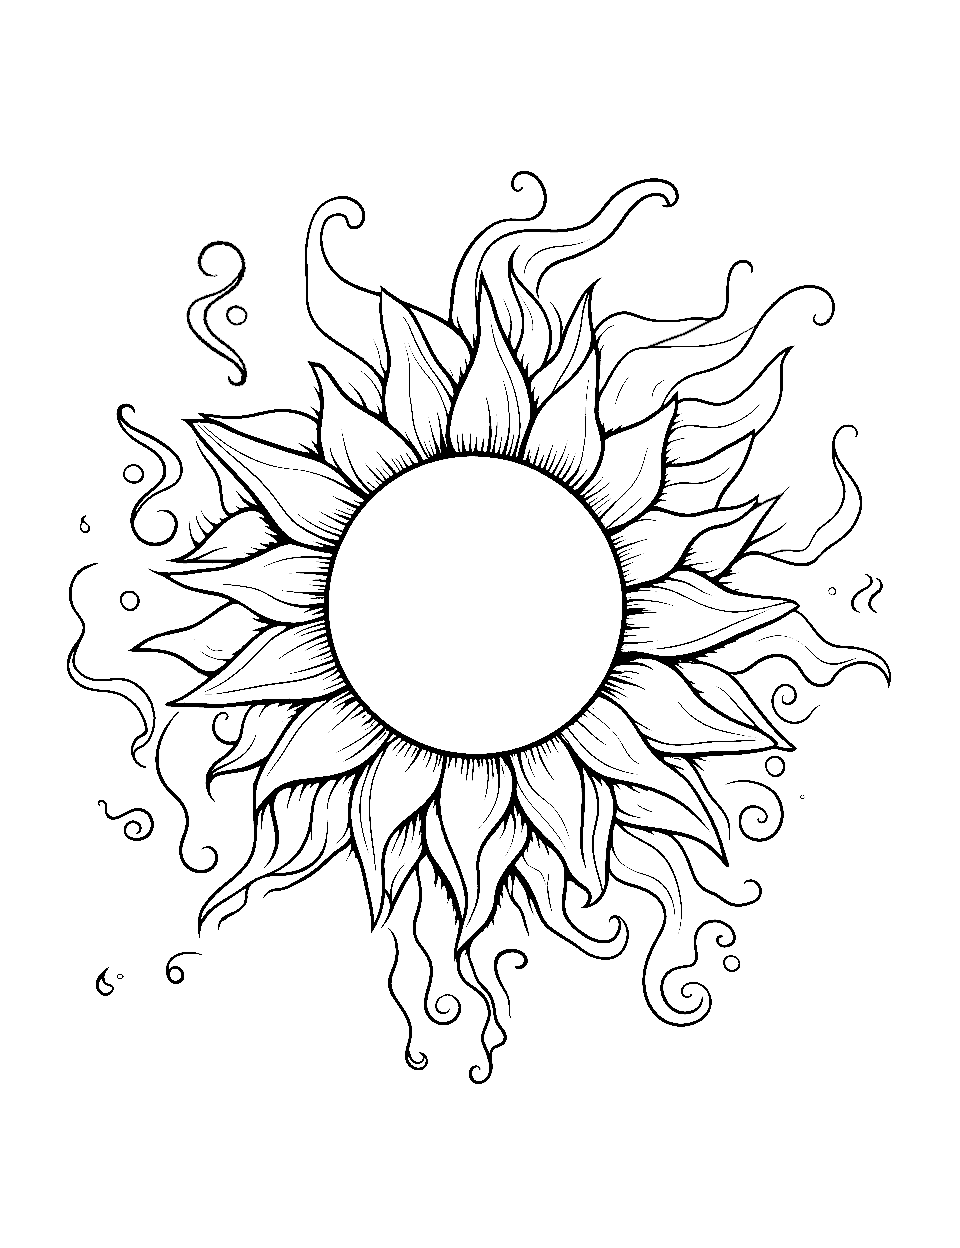 Sun's Fiery Fury Coloring Page - The sun bursting with flames.